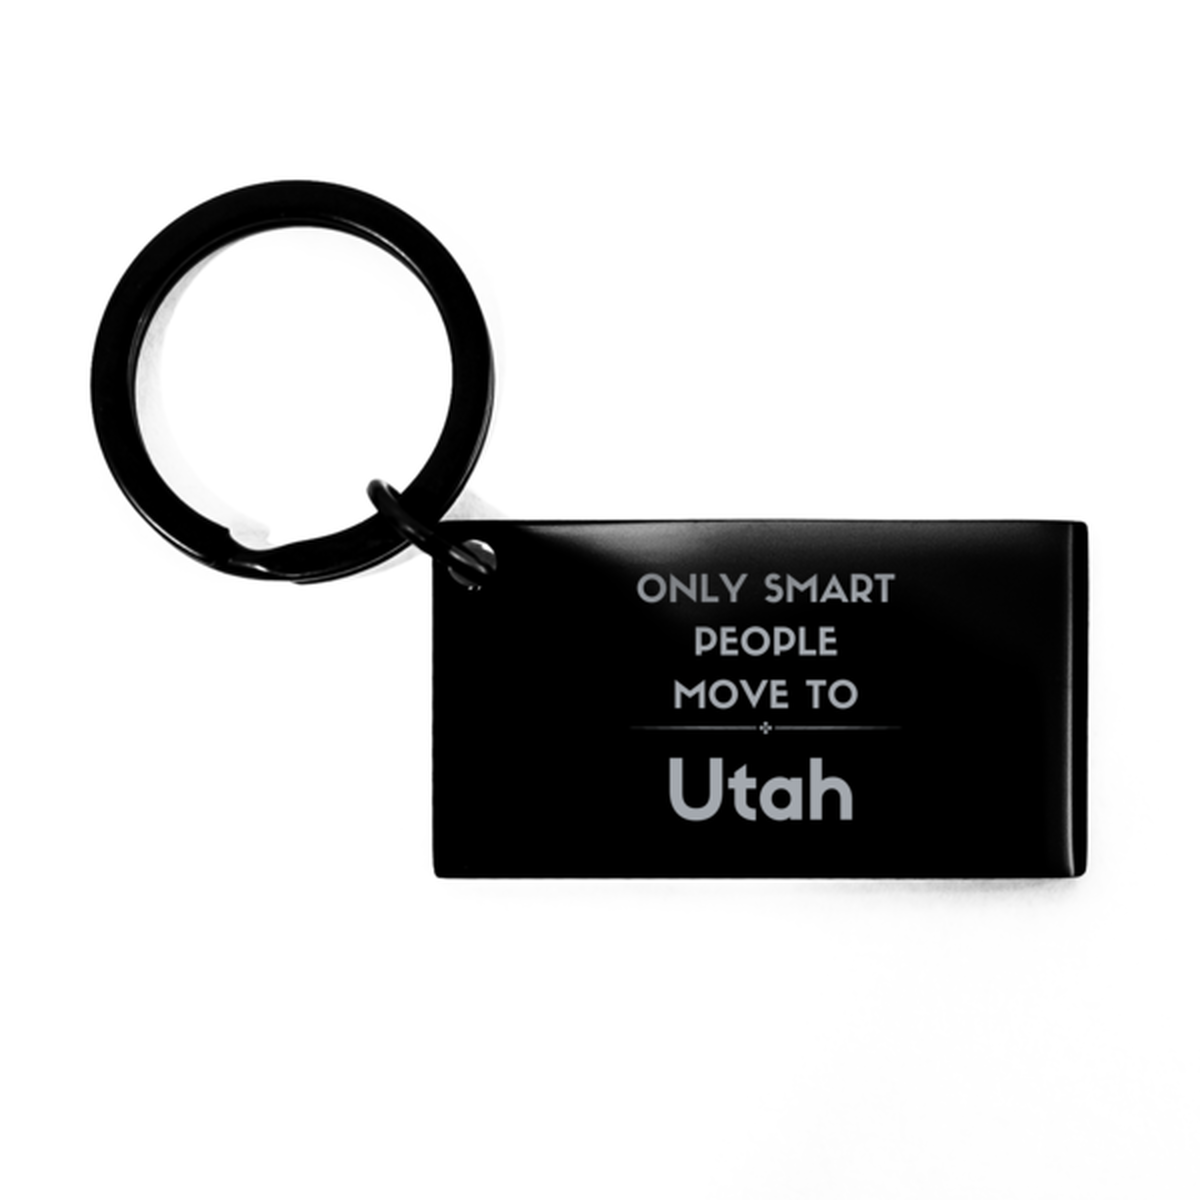 Only smart people move to Utah Keychain, Gag Gifts For Utah, Move to Utah Gifts for Friends Coworker Funny Saying Quote